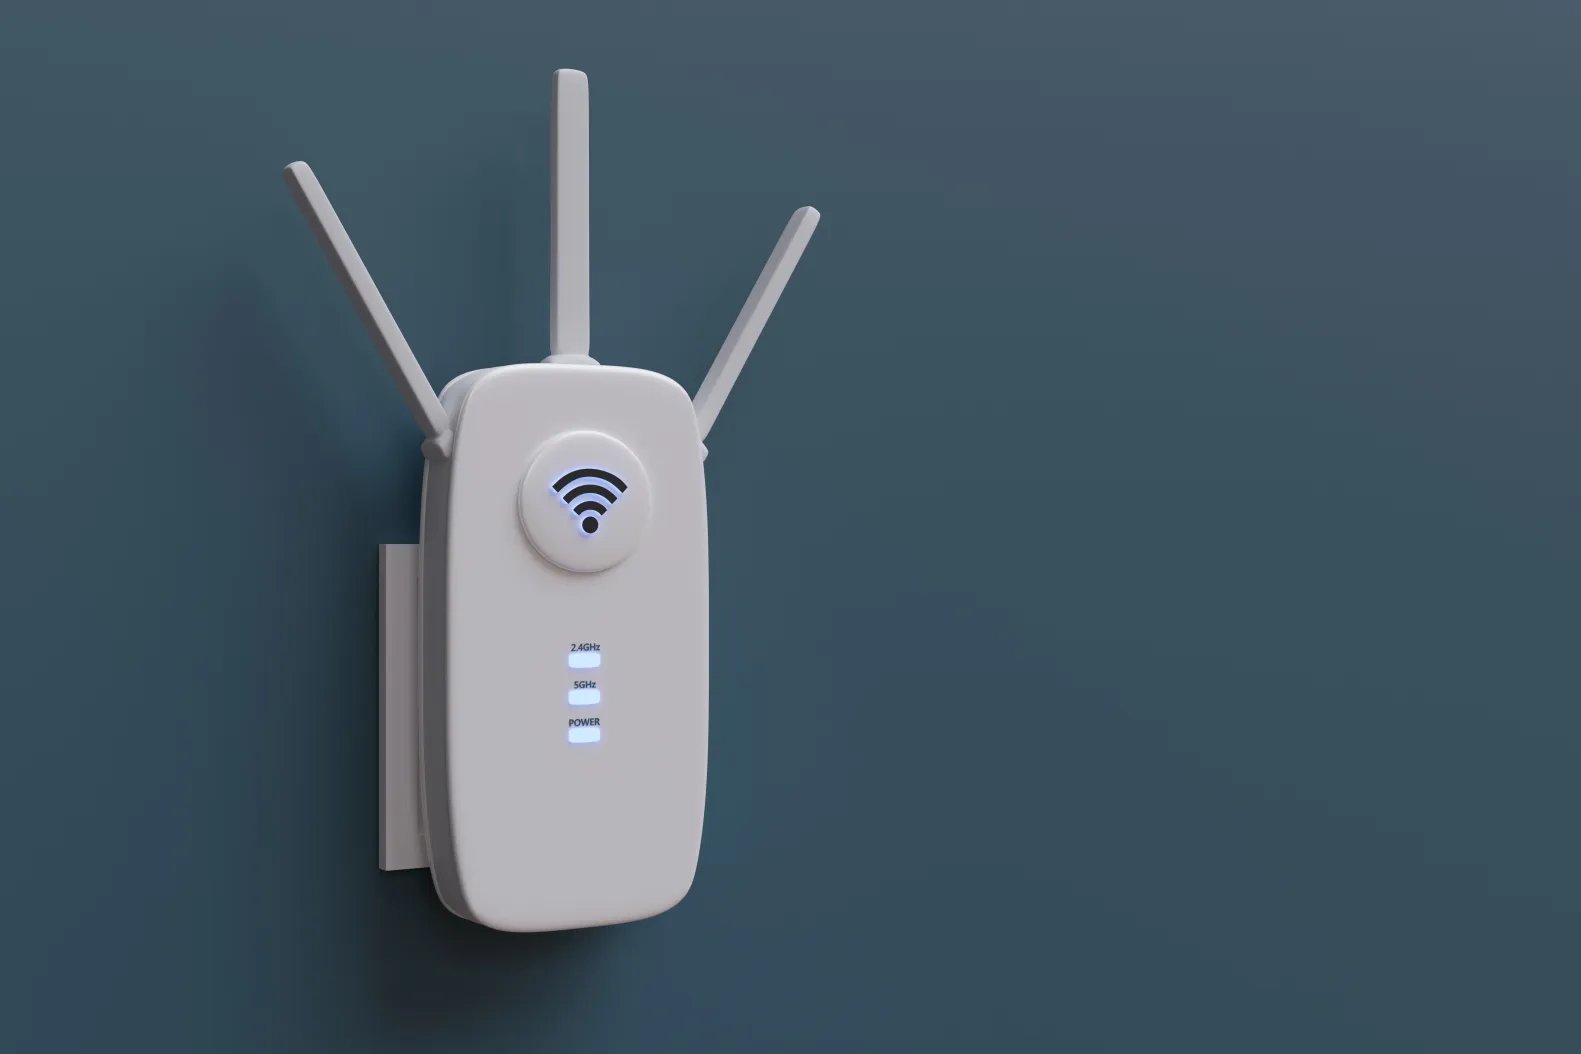 How Are Wi-Fi Repeaters And Wi-Fi Extenders Different?